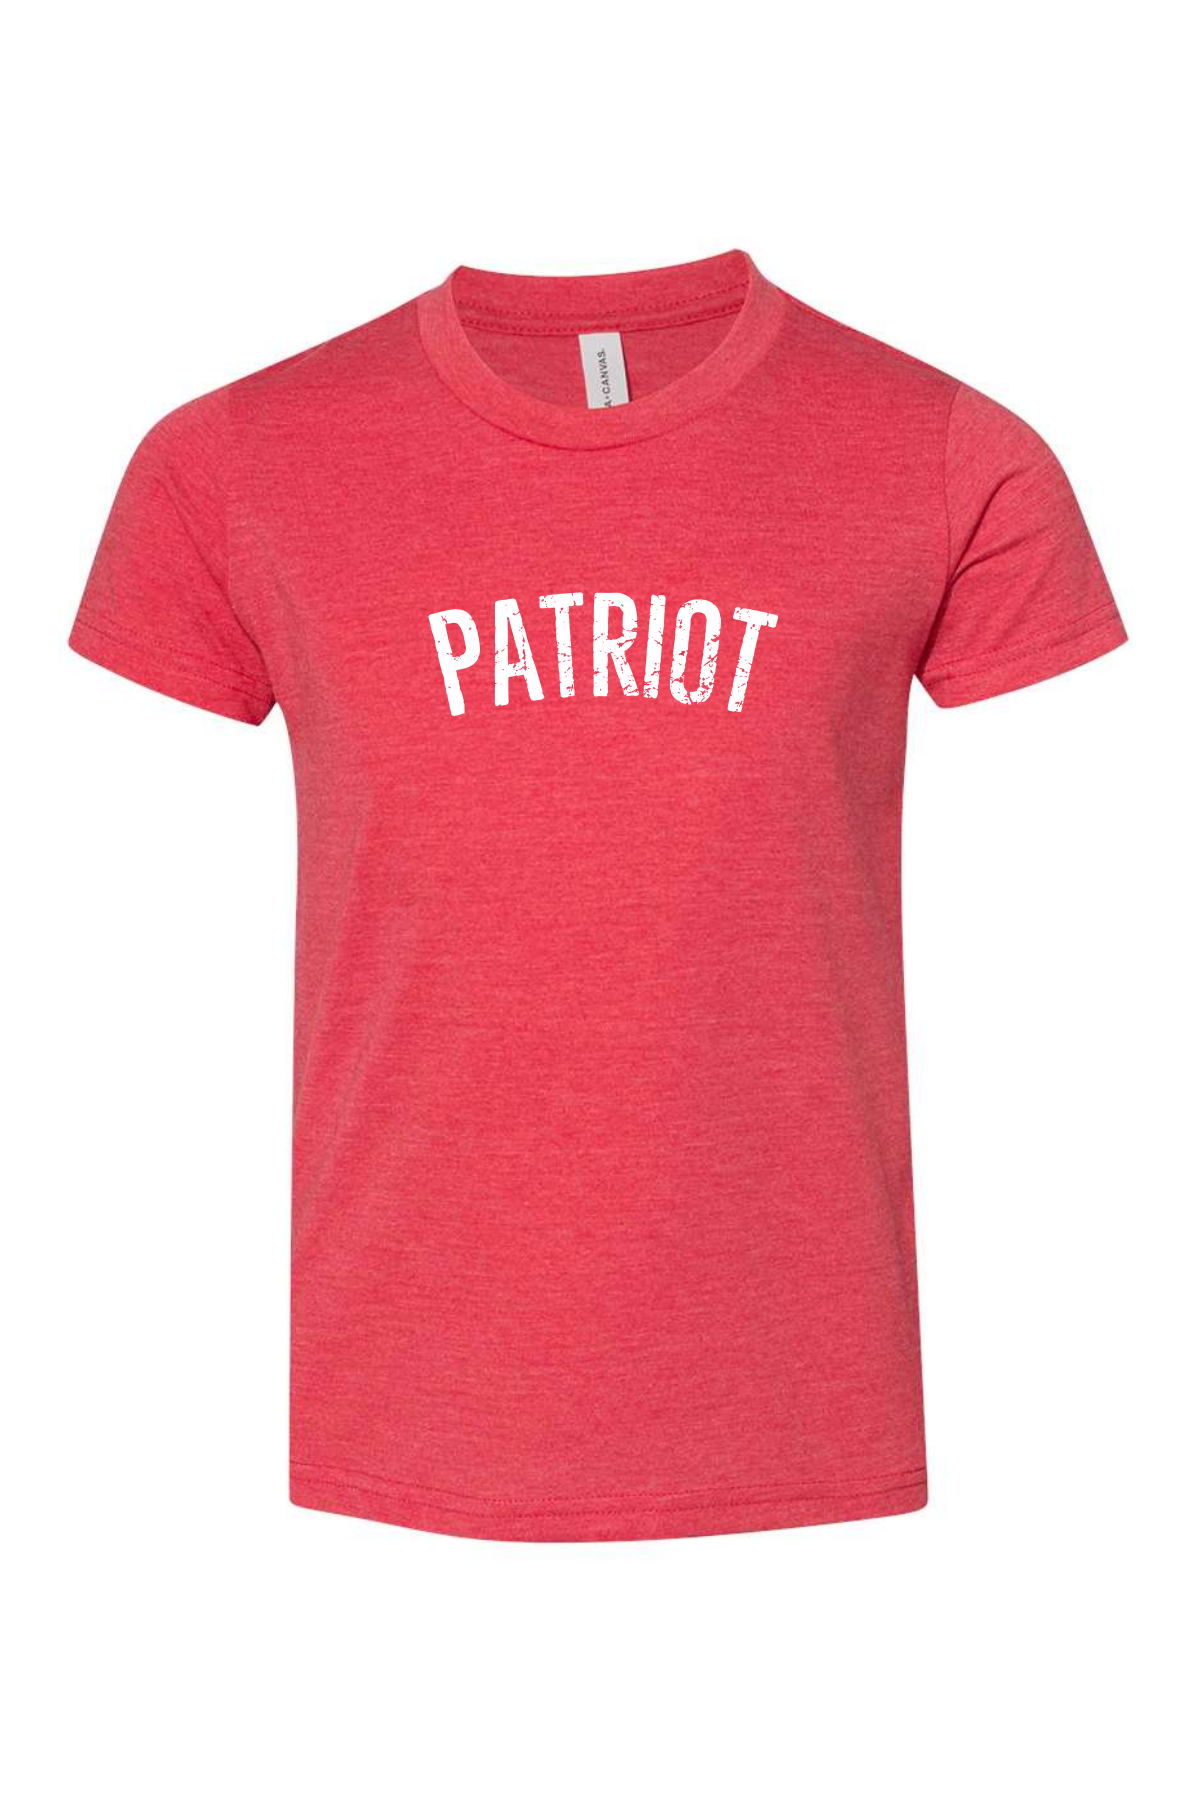 Patriot | Kids Tee | RTS-Kids Tees-Sister Shirts-Sister Shirts, Cute & Custom Tees for Mama & Littles in Trussville, Alabama.